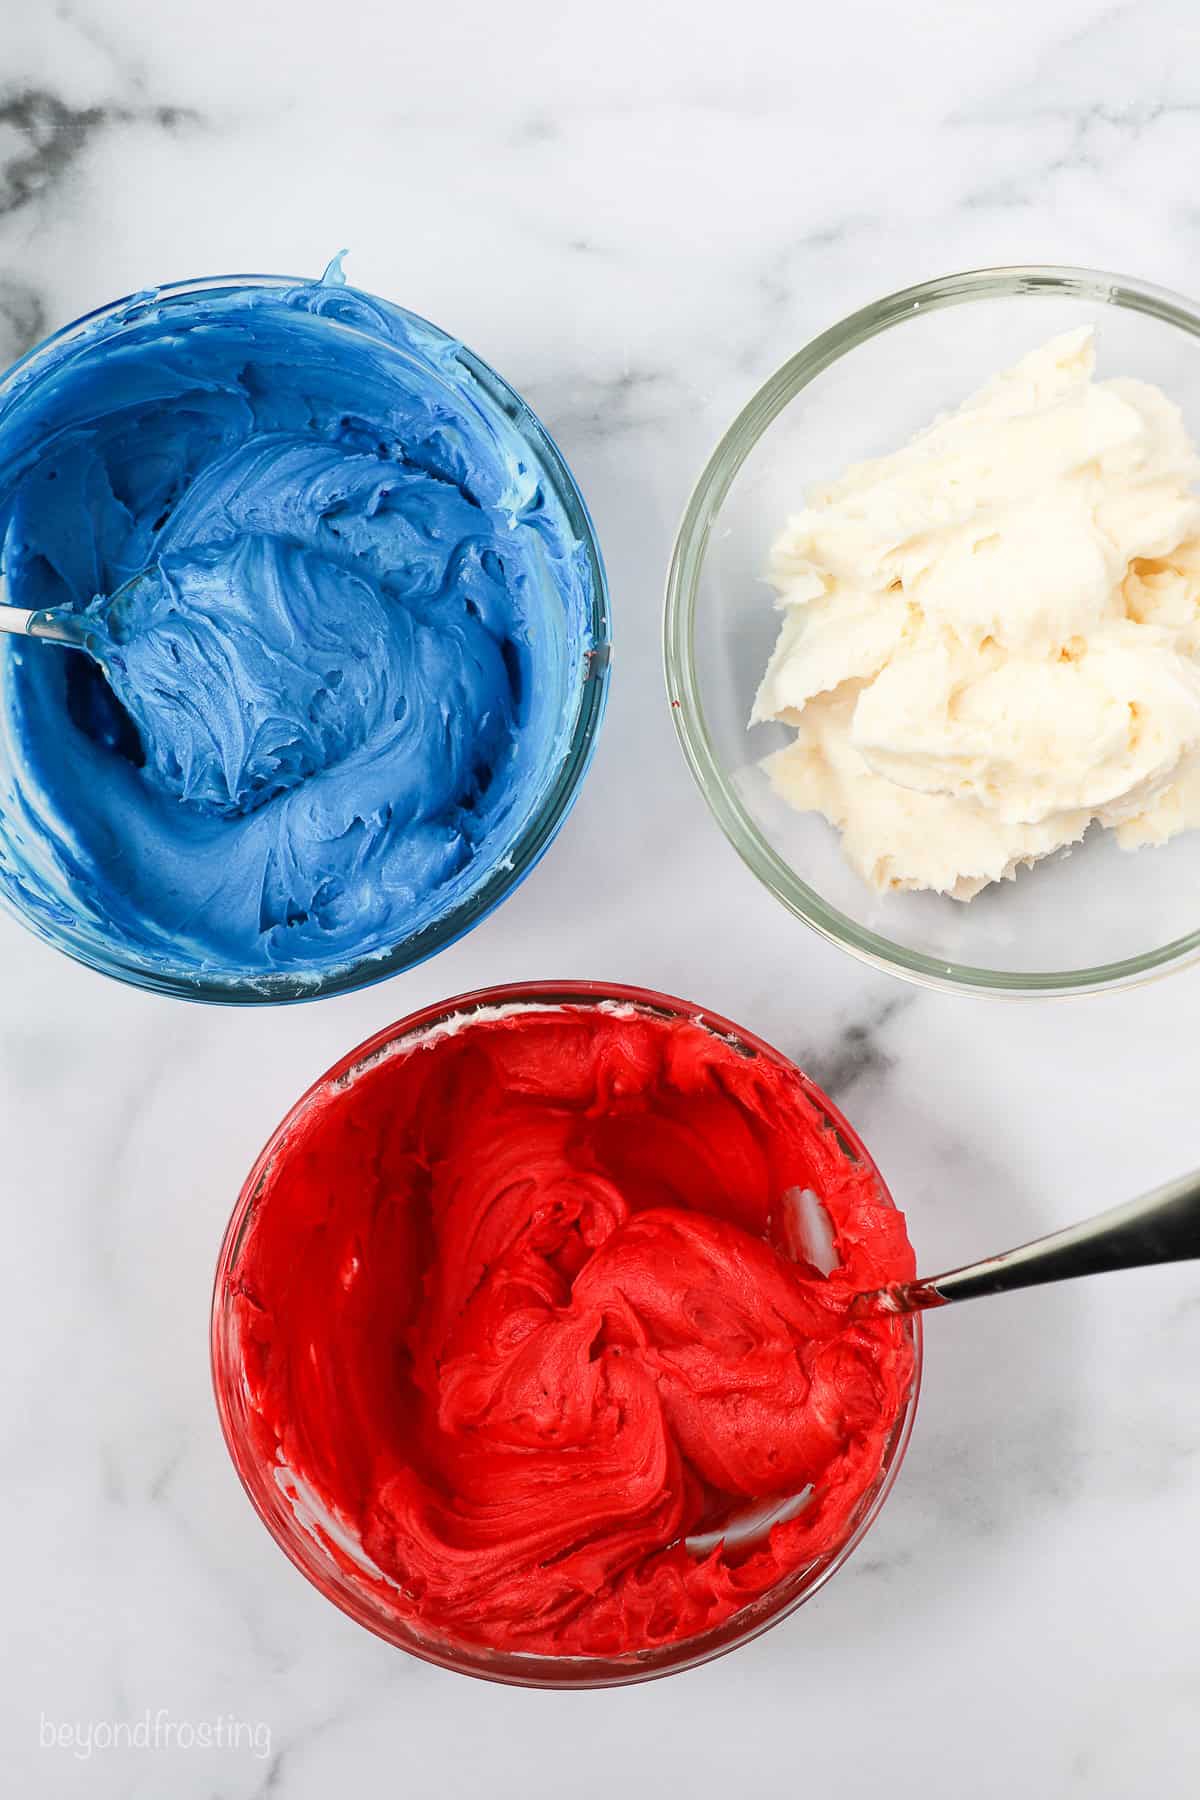 Overhead view of three bowls of red, white, and blue colored frosting.